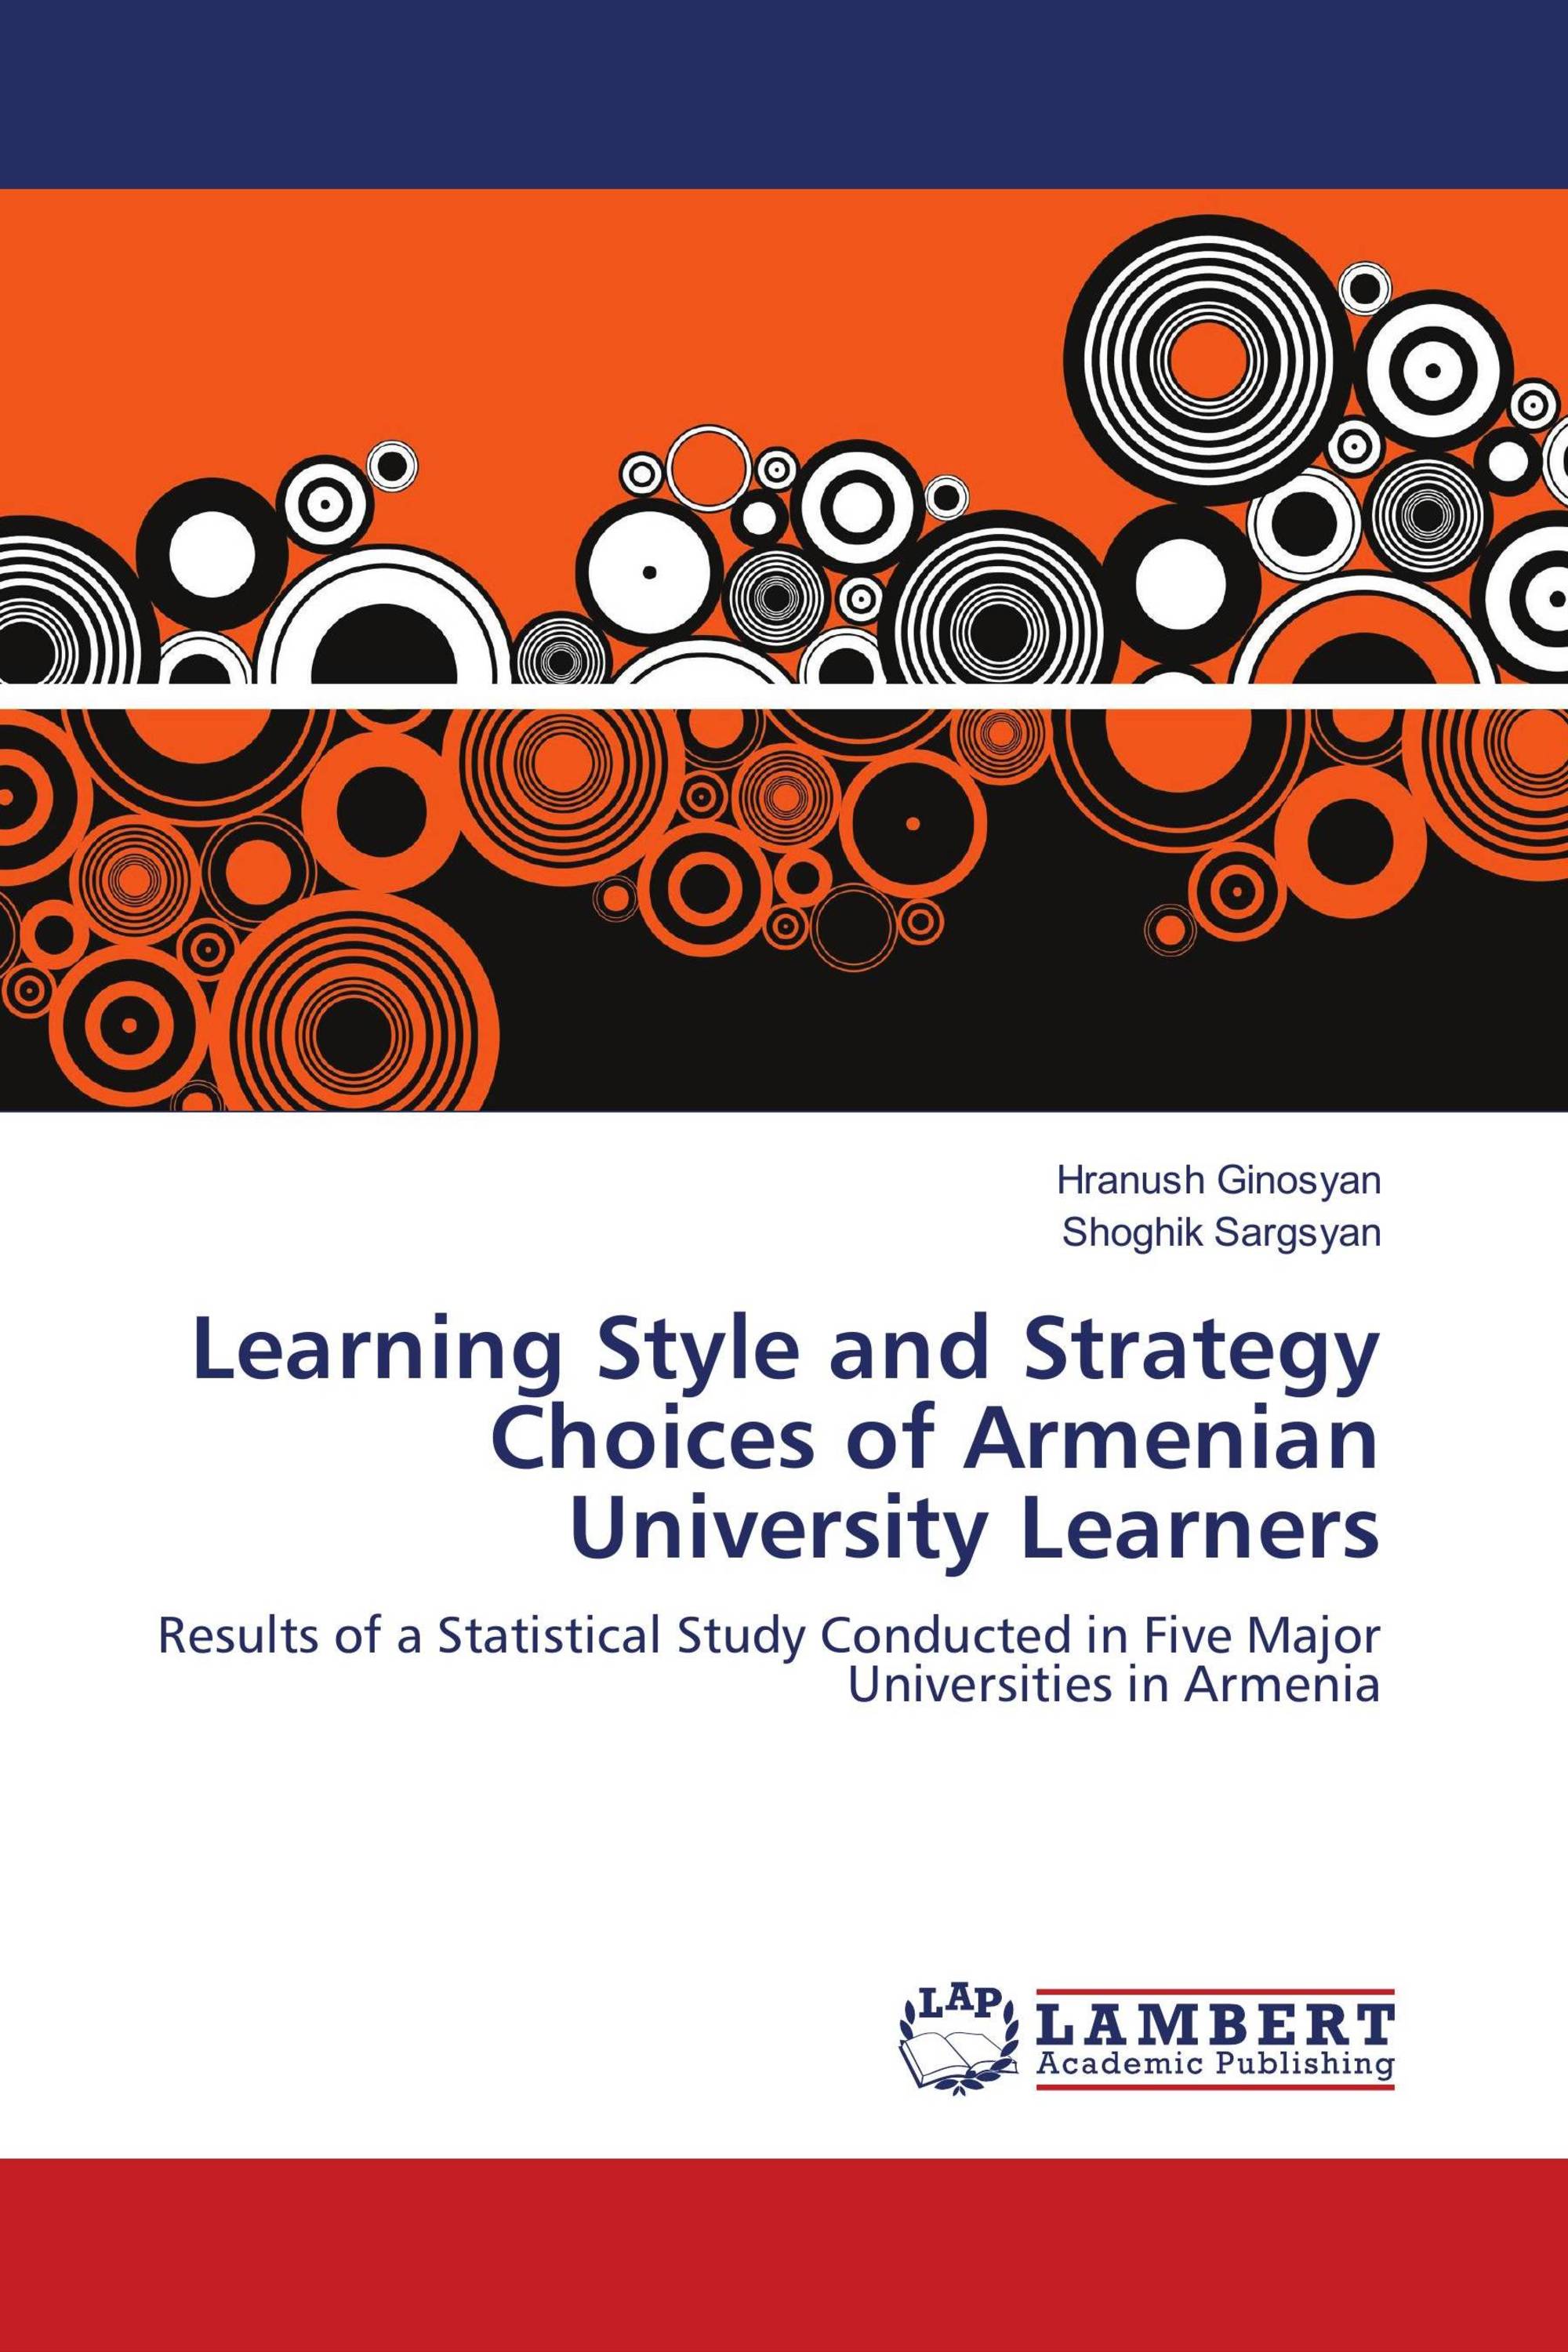 Learning Style and Strategy Choices of Armenian University Learners